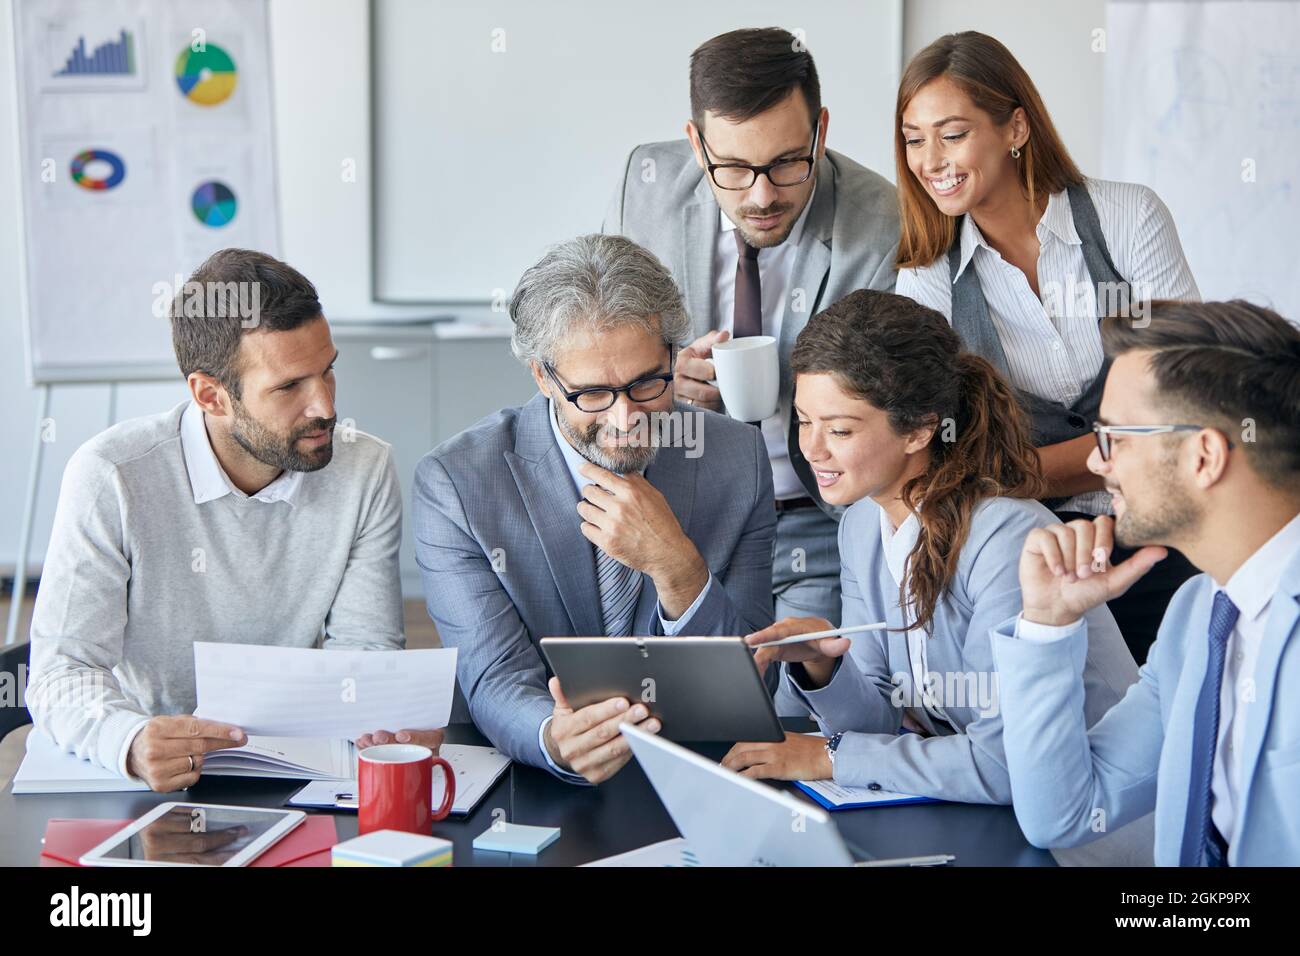 business meeting office conference team teamwork Stock Photo